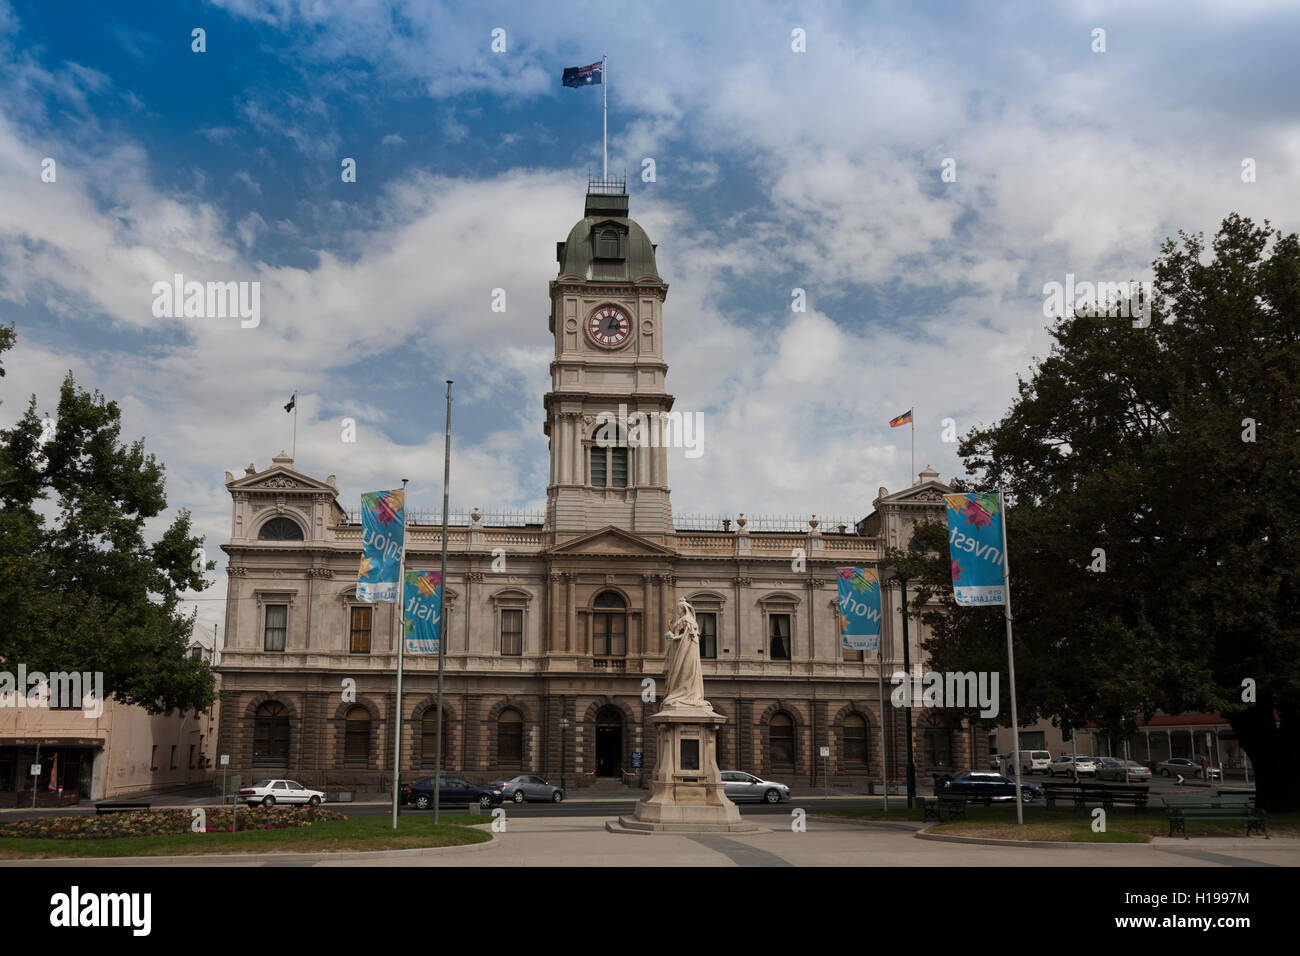 The Town Hall is believed to be one of the only three such buildings in the world equipped with bells. Ballarat  Australia Stock Photo